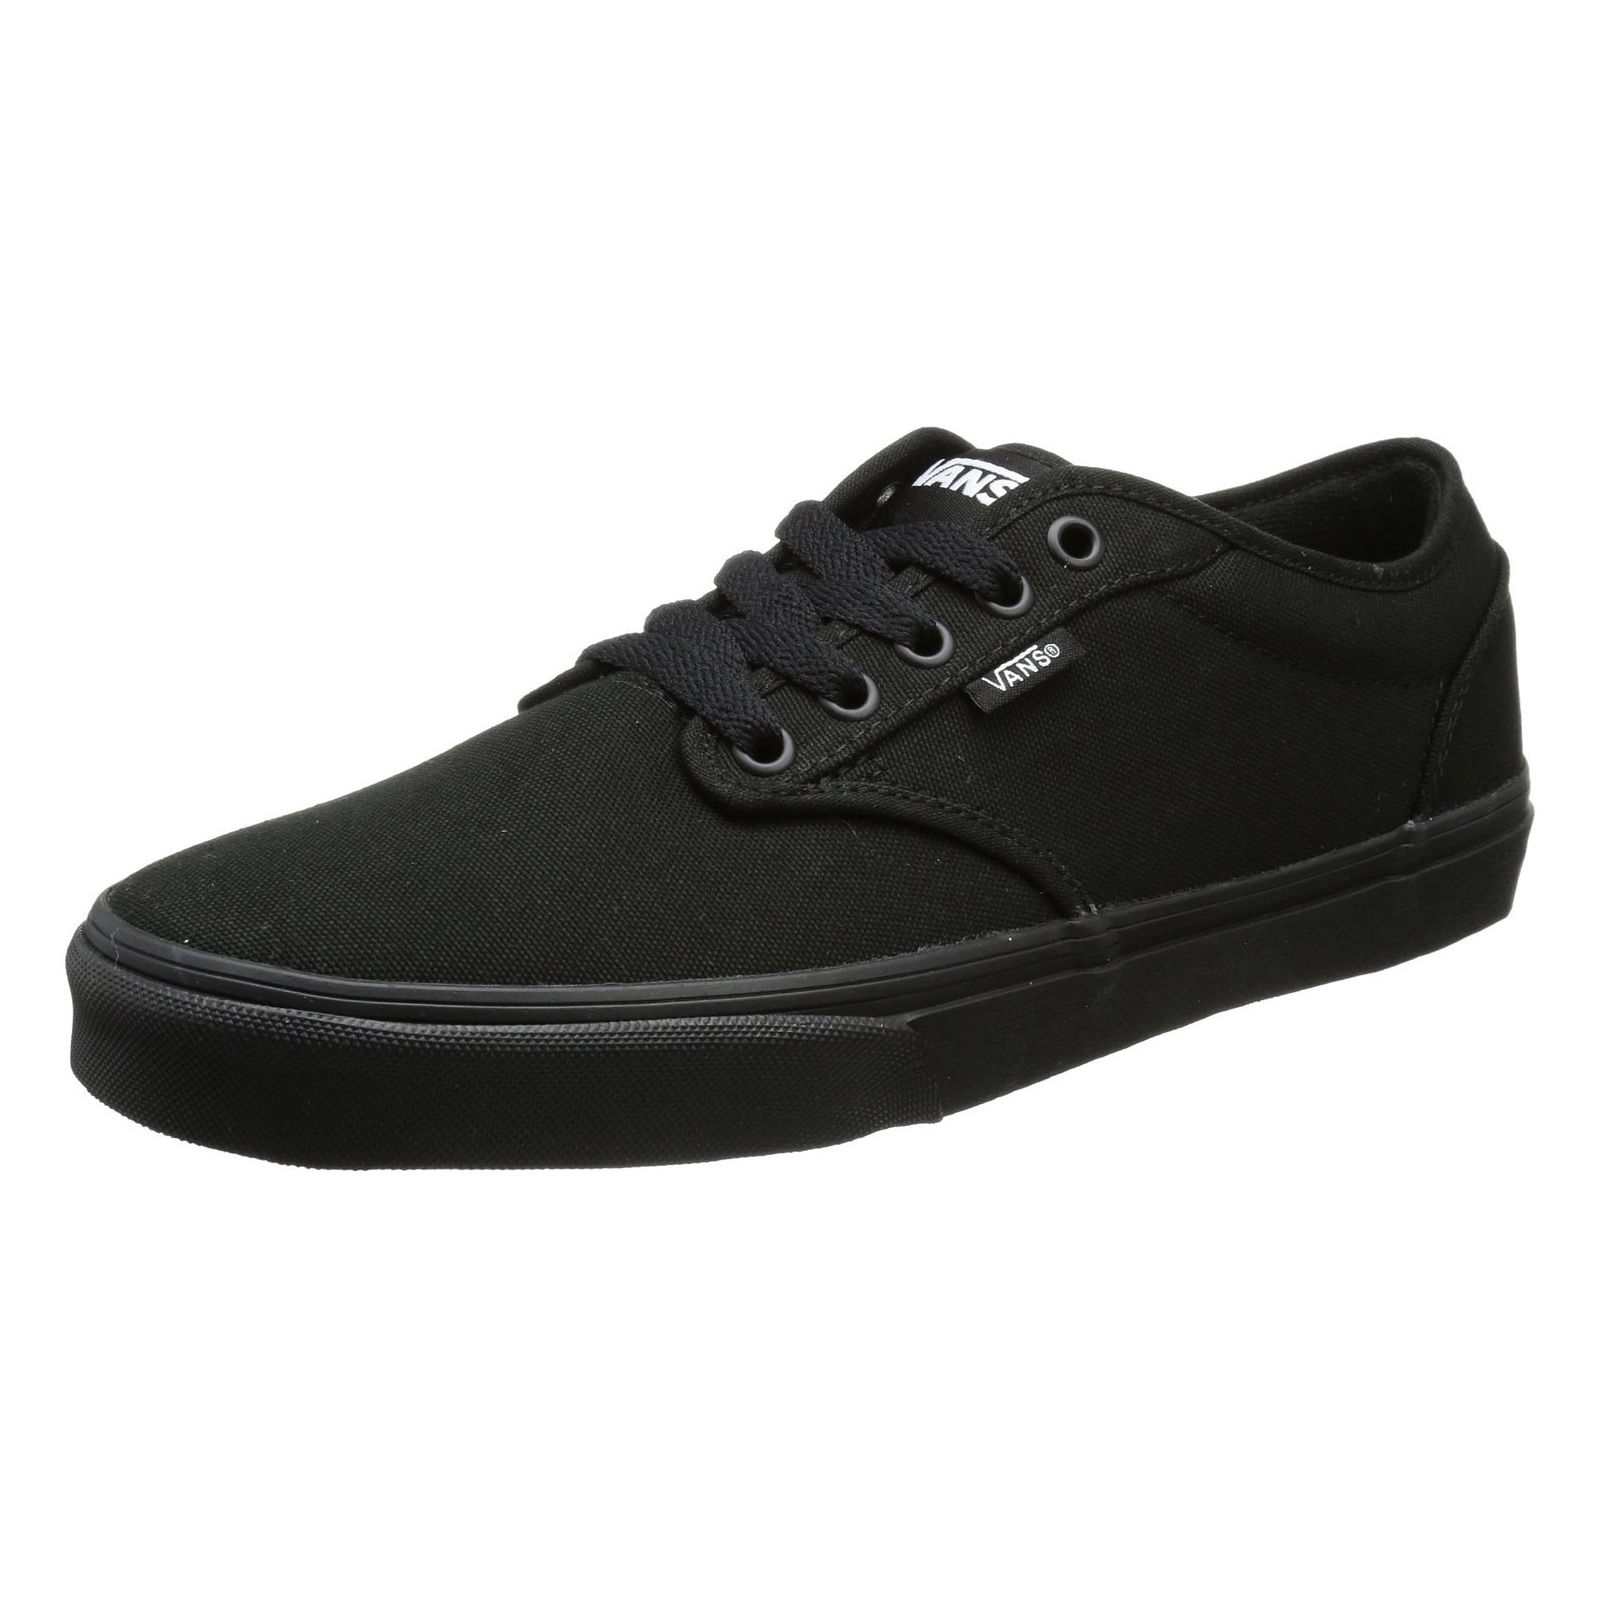 VANS Atwood hommes toile patineuse 